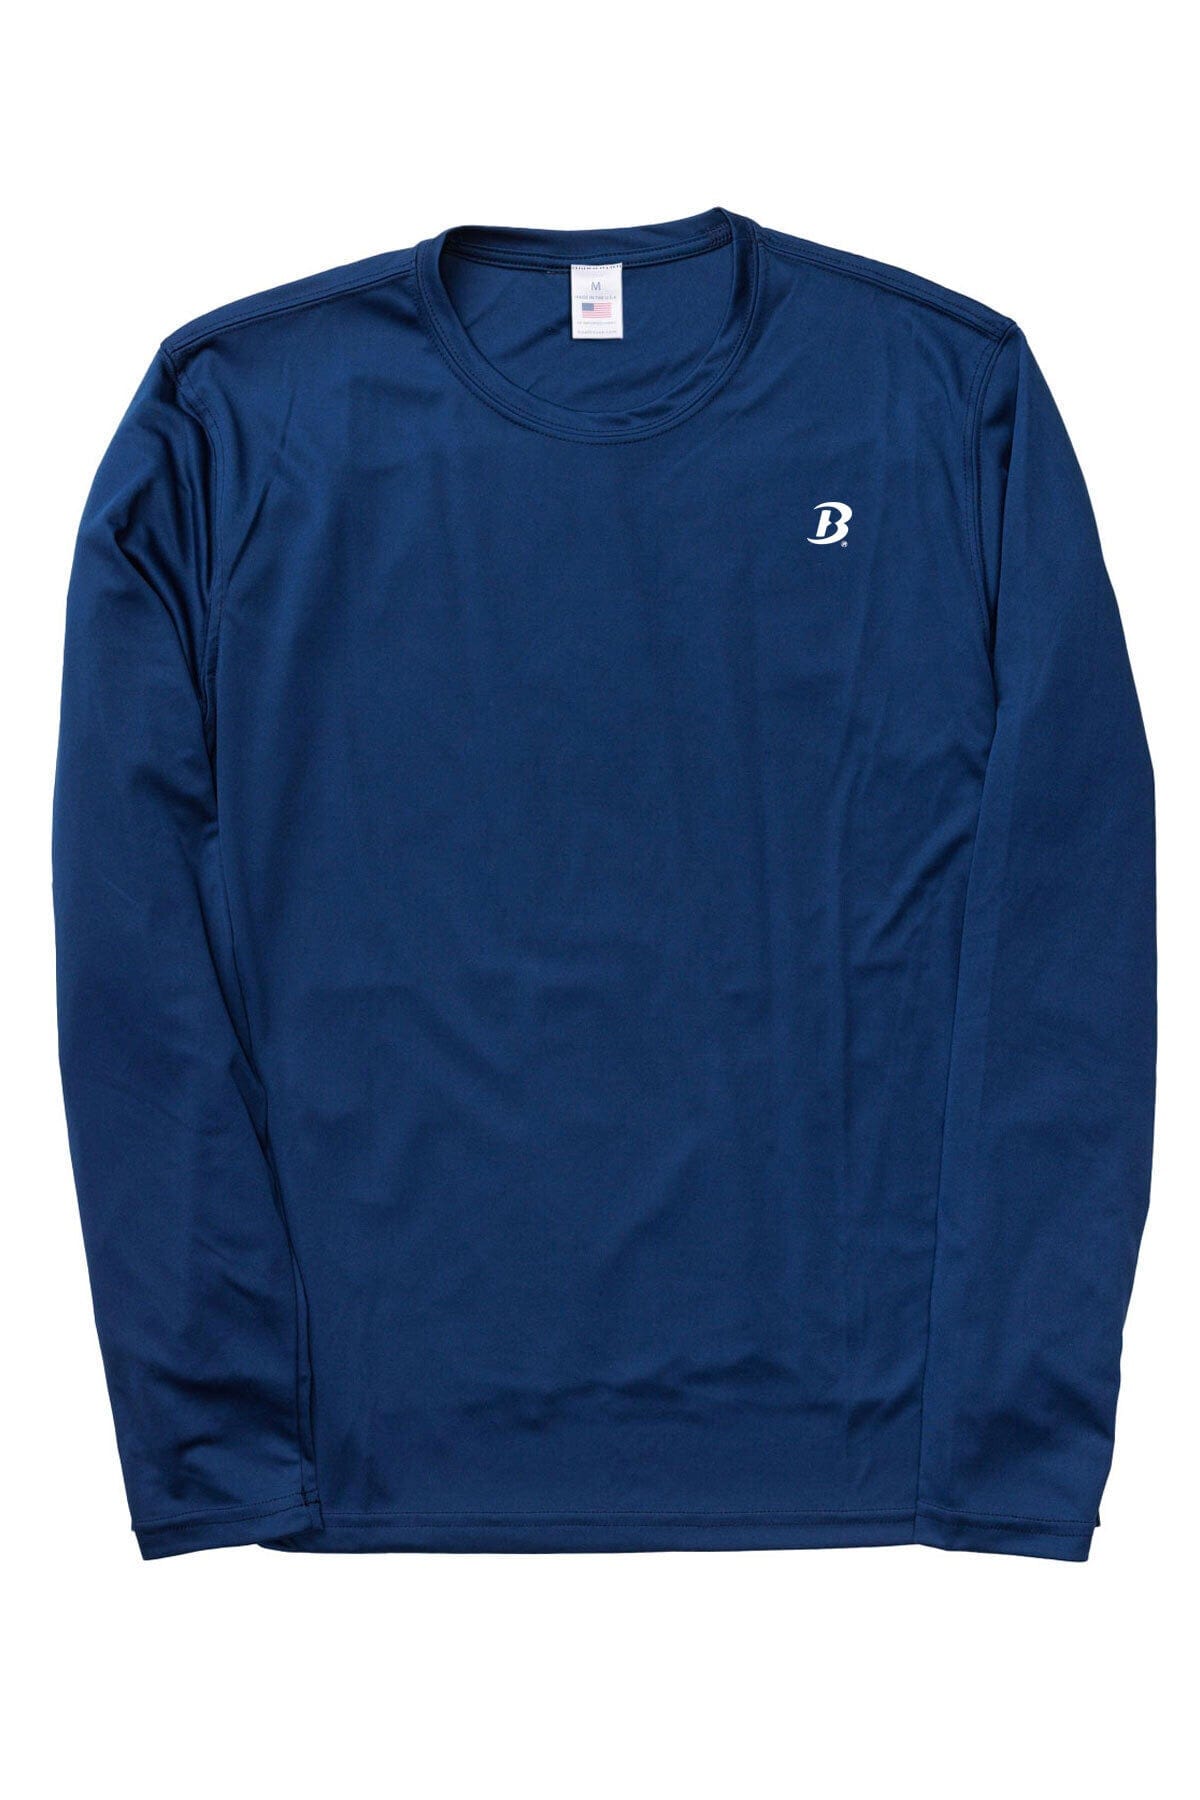 Front of Navy Unisex Crew UV Protection Long Sleeve